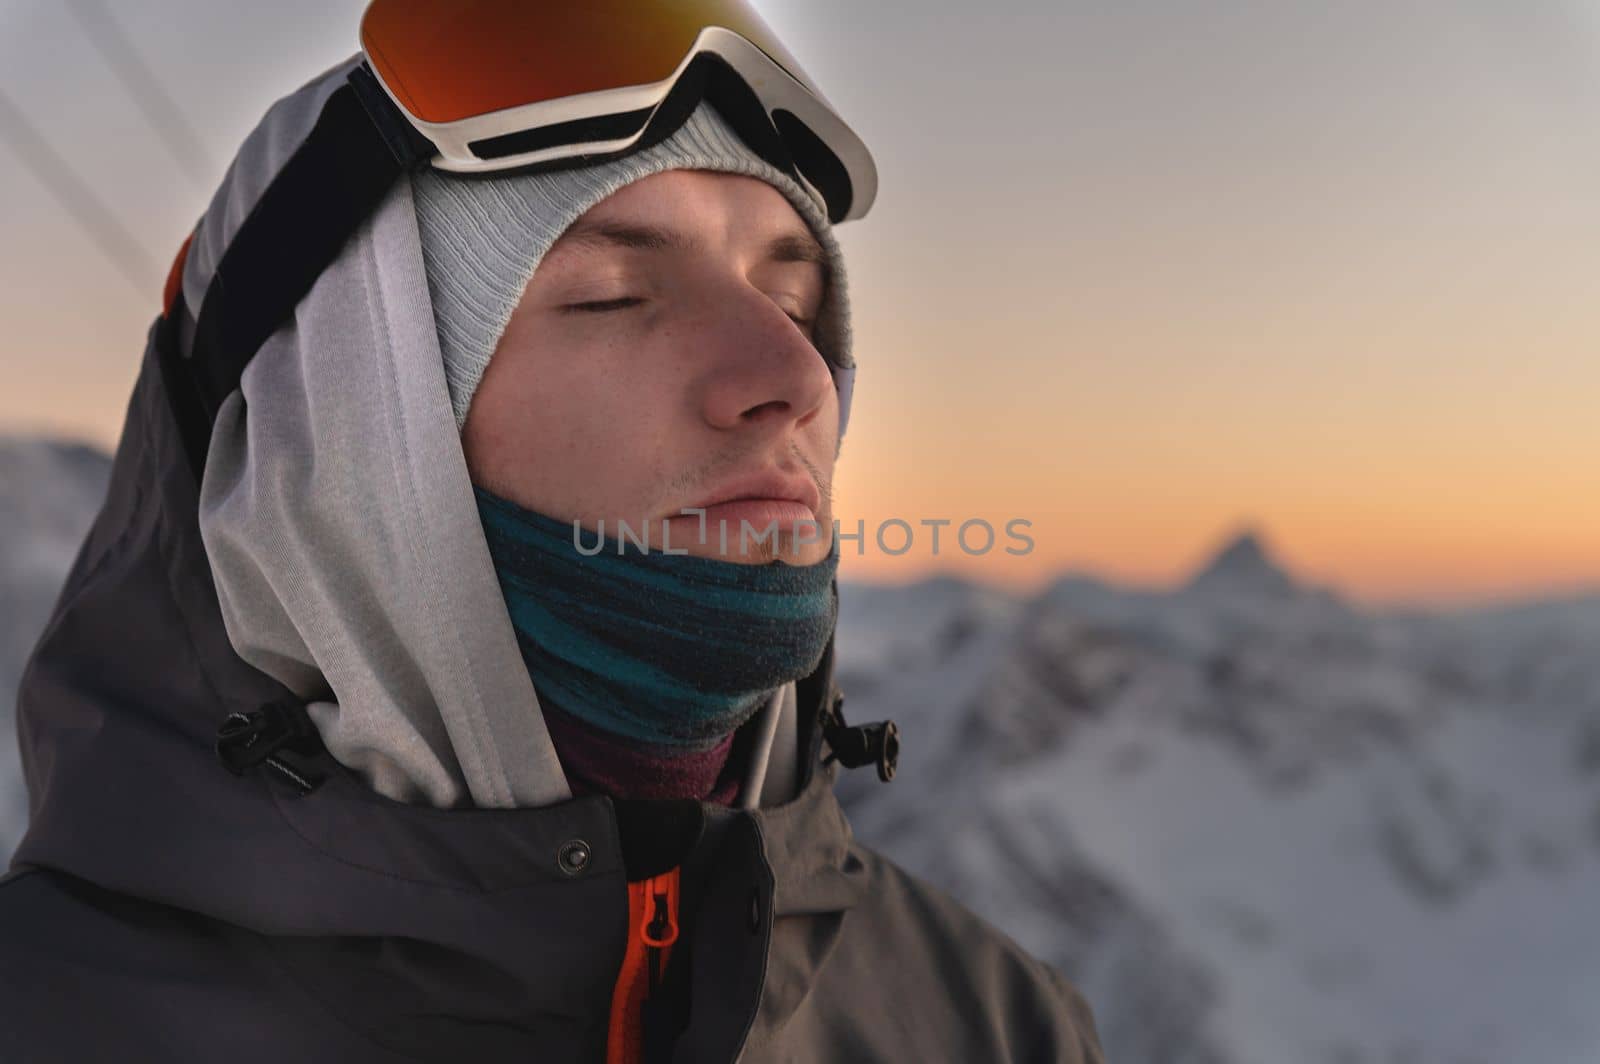 Close up portrait of happy young man in cold weather in winter mountains at sunset. The face of a peaceful man from the beauty of nature.